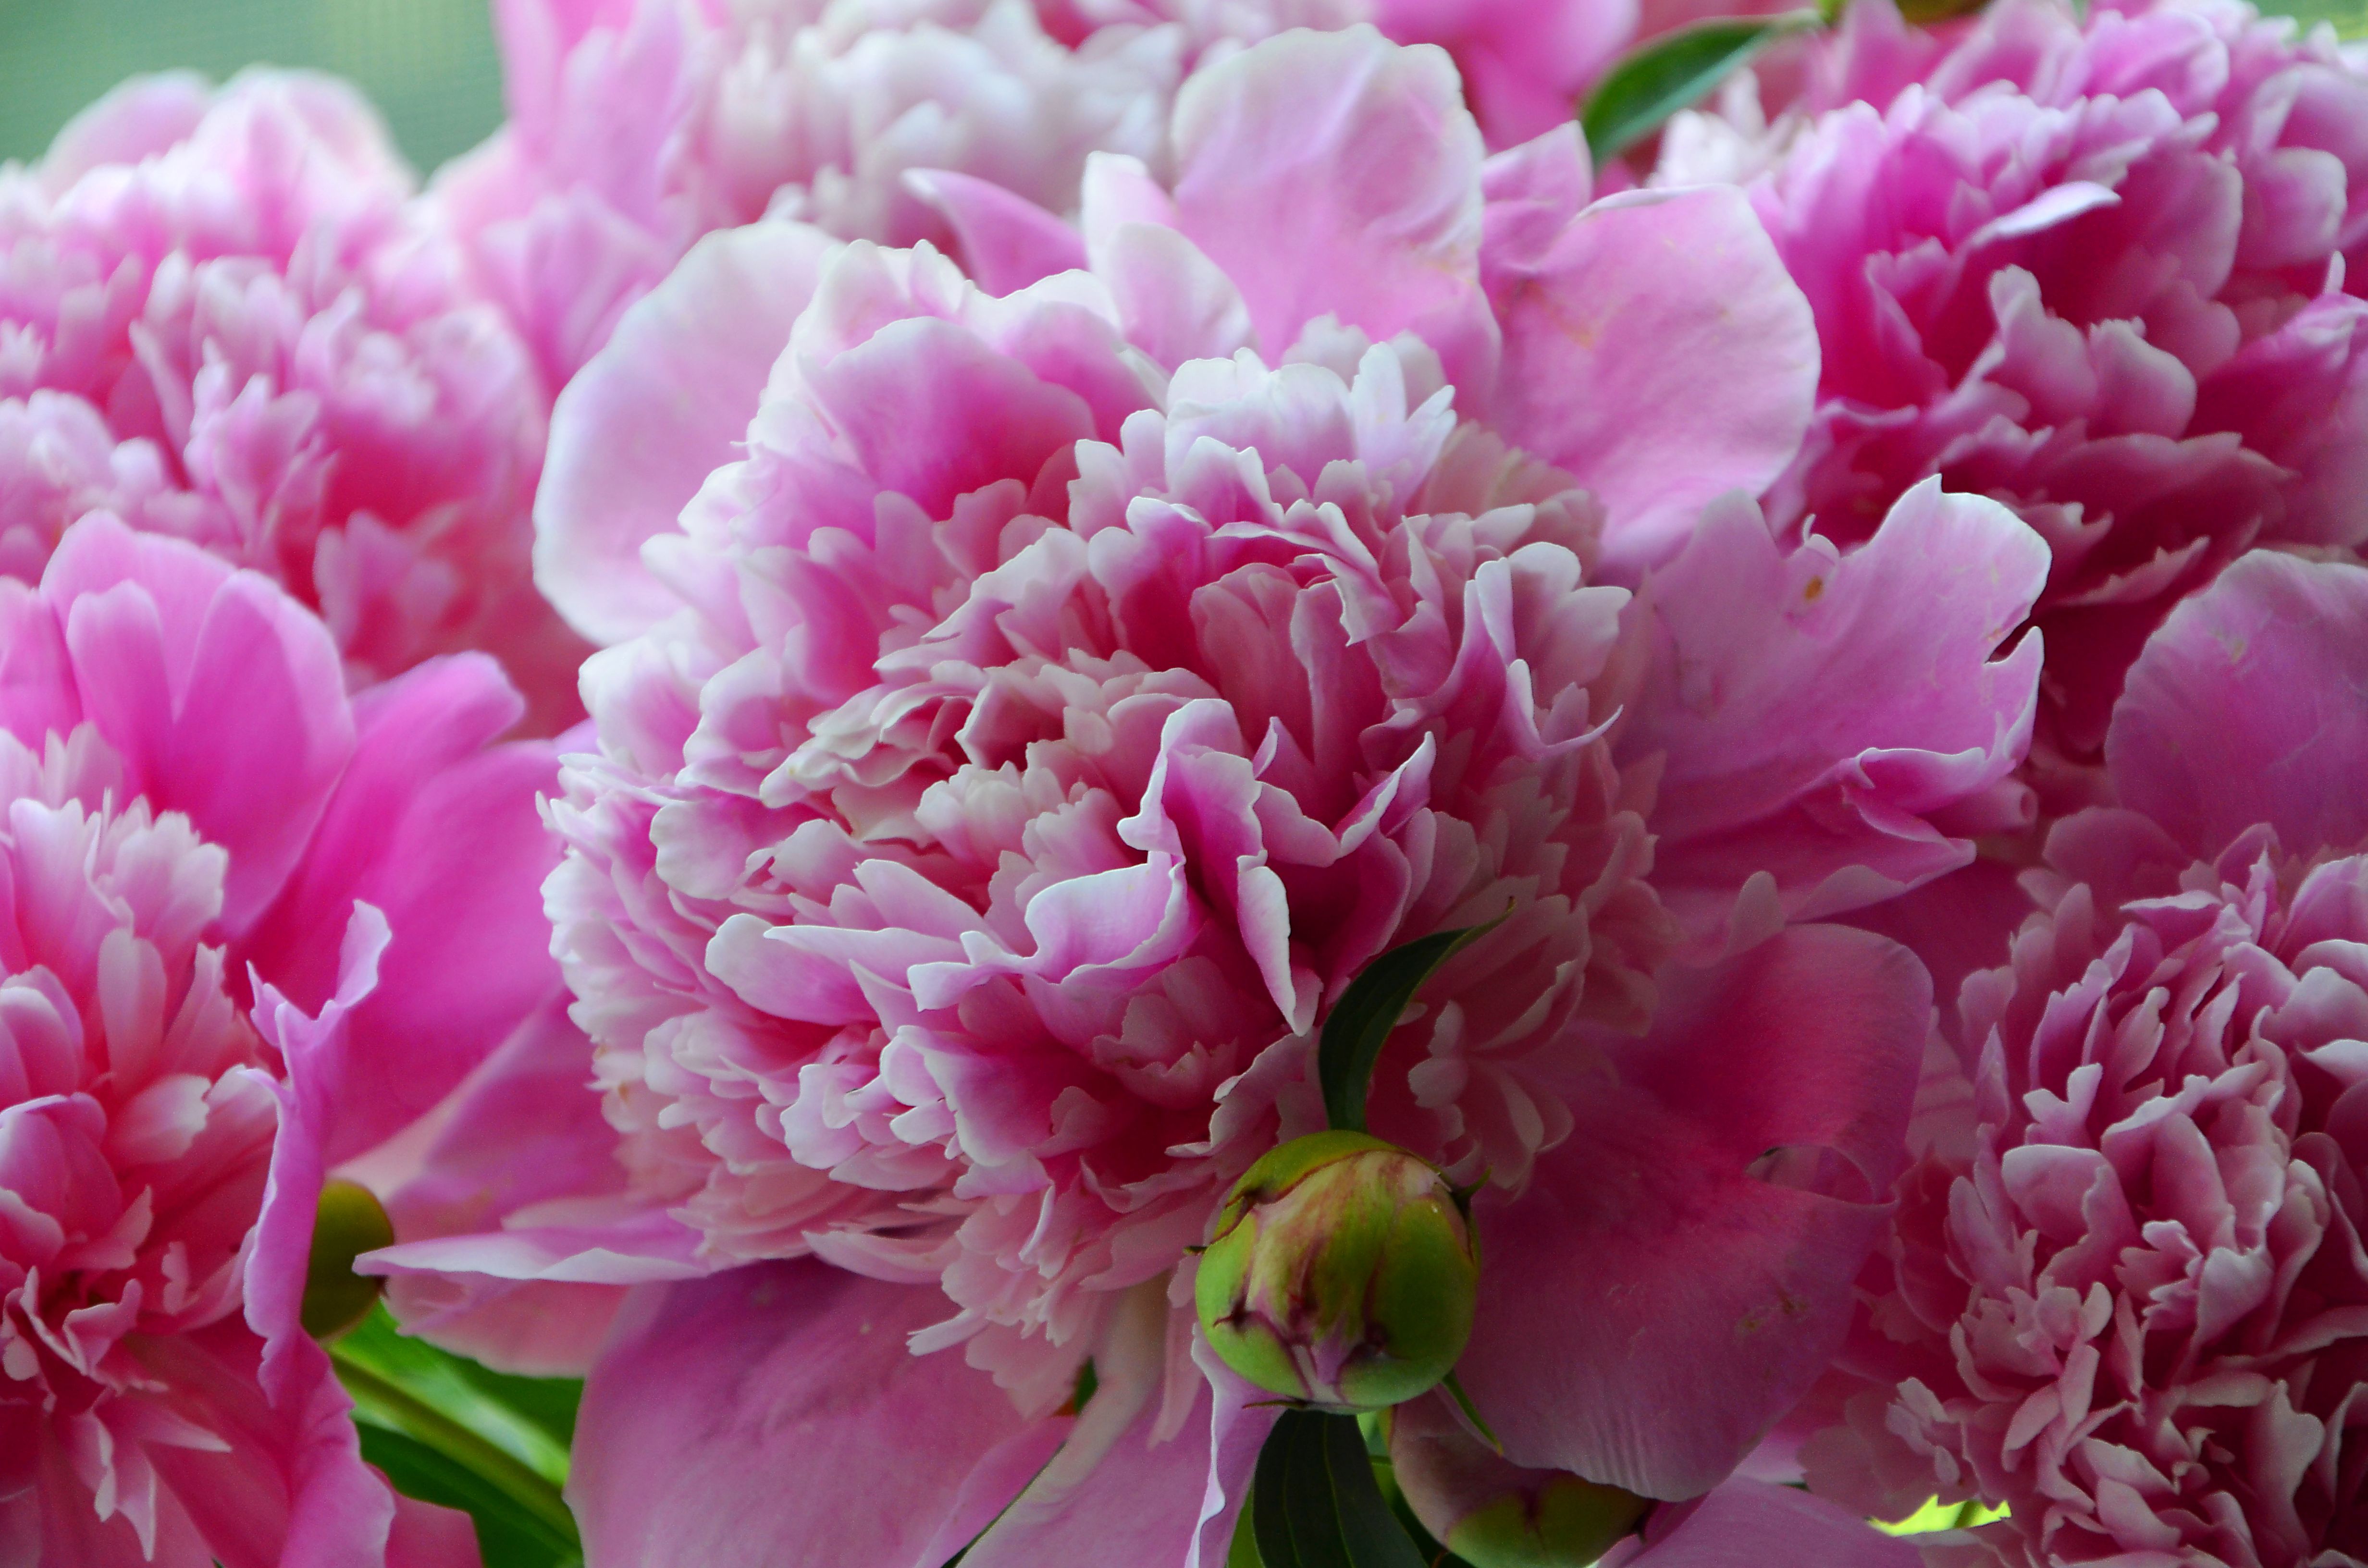 earth, peony, flower, nature, pink flower, flowers